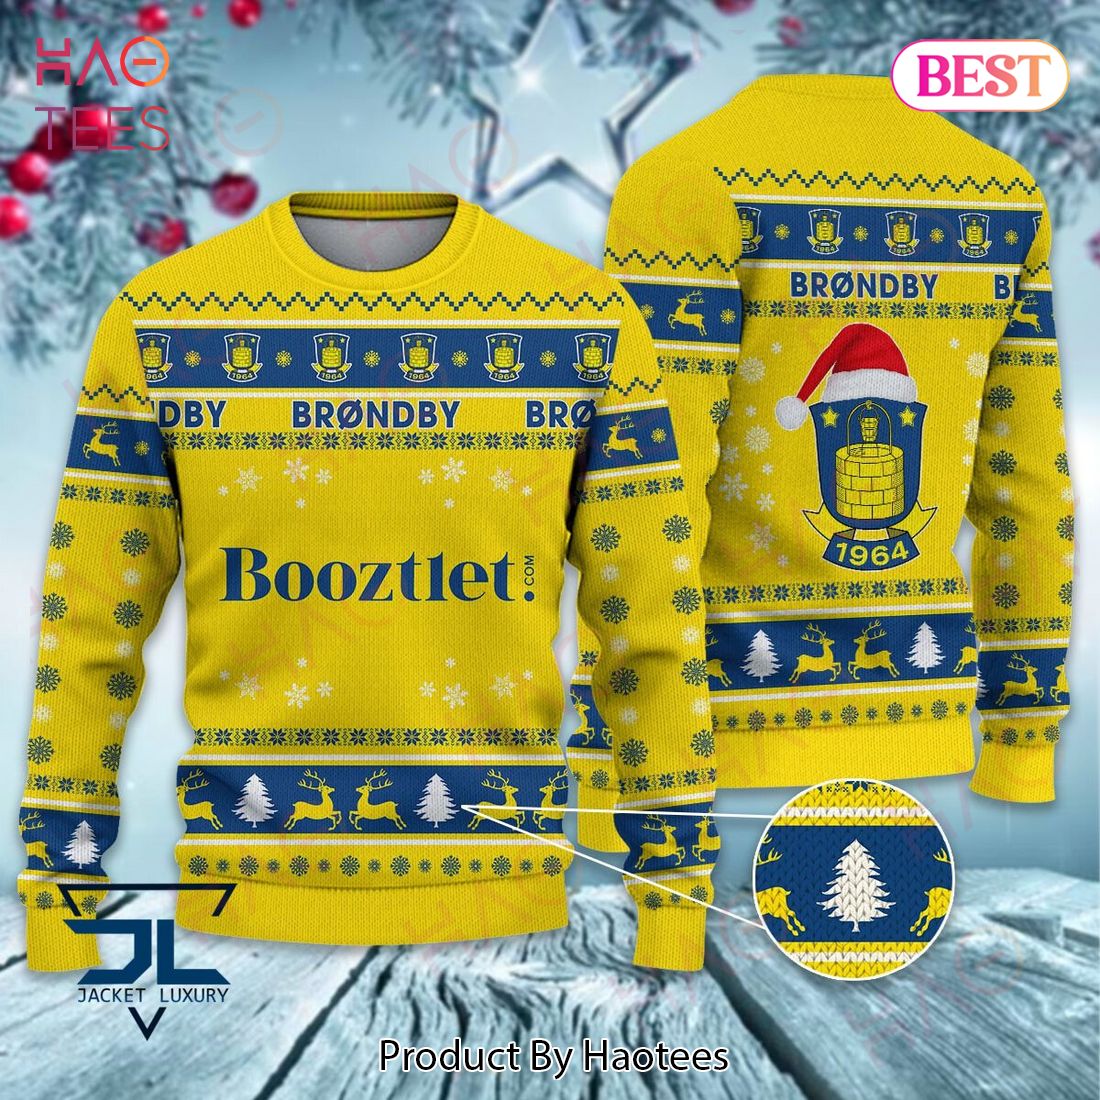 Brondby IF Booztler Christmas Luxury Brand Sweater Limited Edition